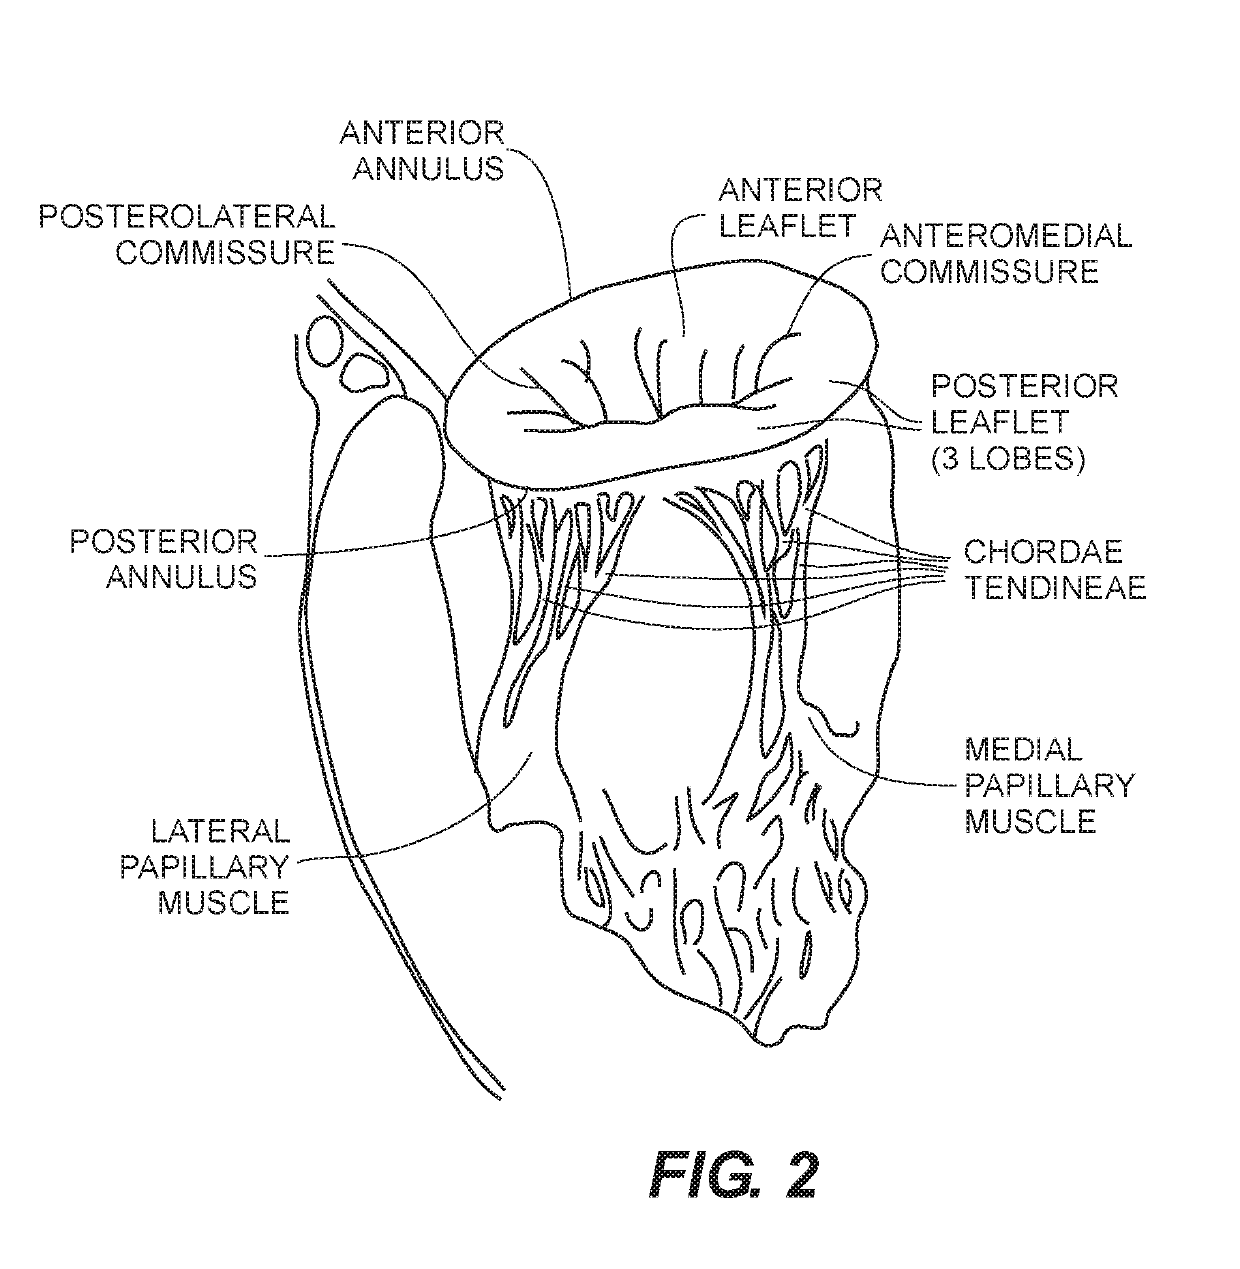 Expandable frames and paravalvular leak mitigation systems for implantable prosthetic heart valve devices